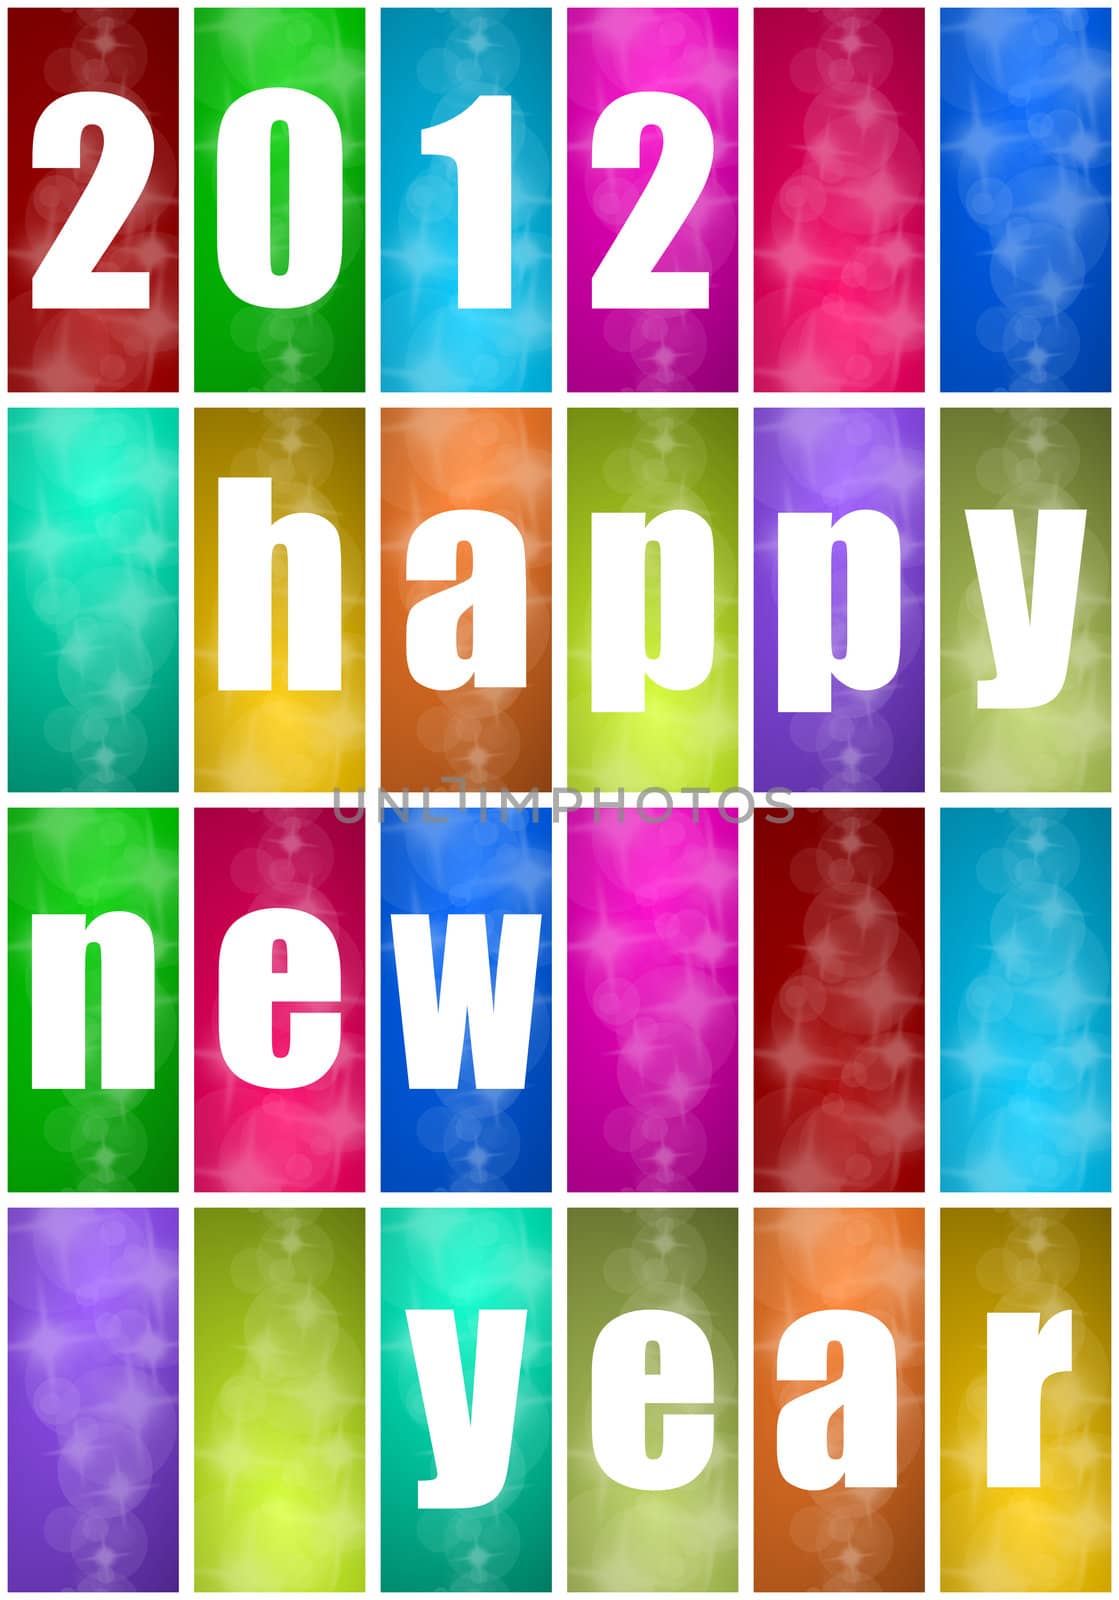 2012 new year abstract background by alexwhite